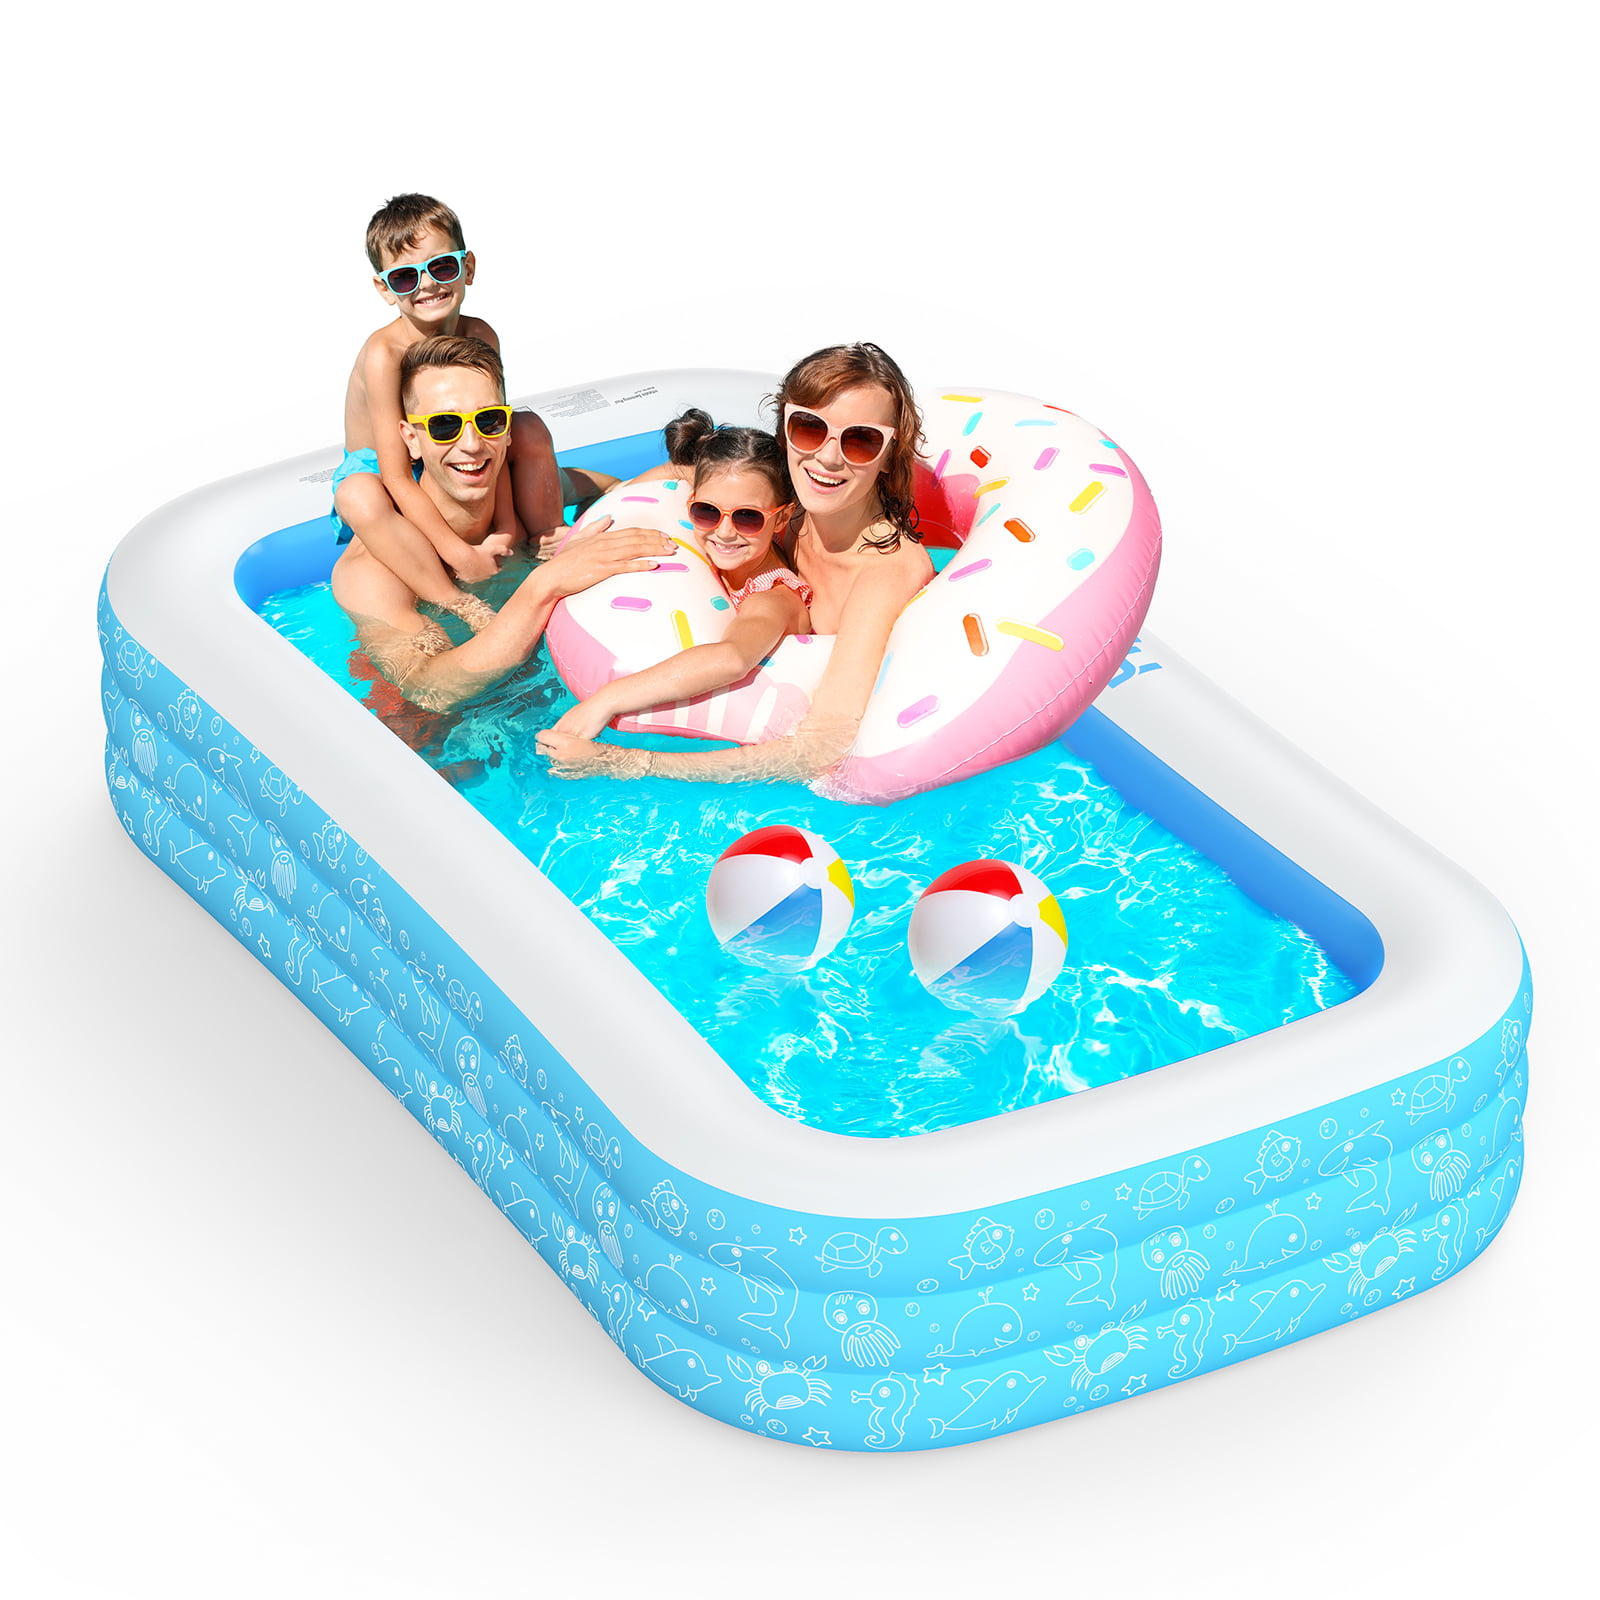 and Baby Ball Pit Hyvigor Inflatable Swimming Pool for Kids 95x56x22 Blow Up Rectangular Pools Above Ground for Adults & Kiddie Outdoor Big Rectangle Family Pool for Backyard Summer Water Games